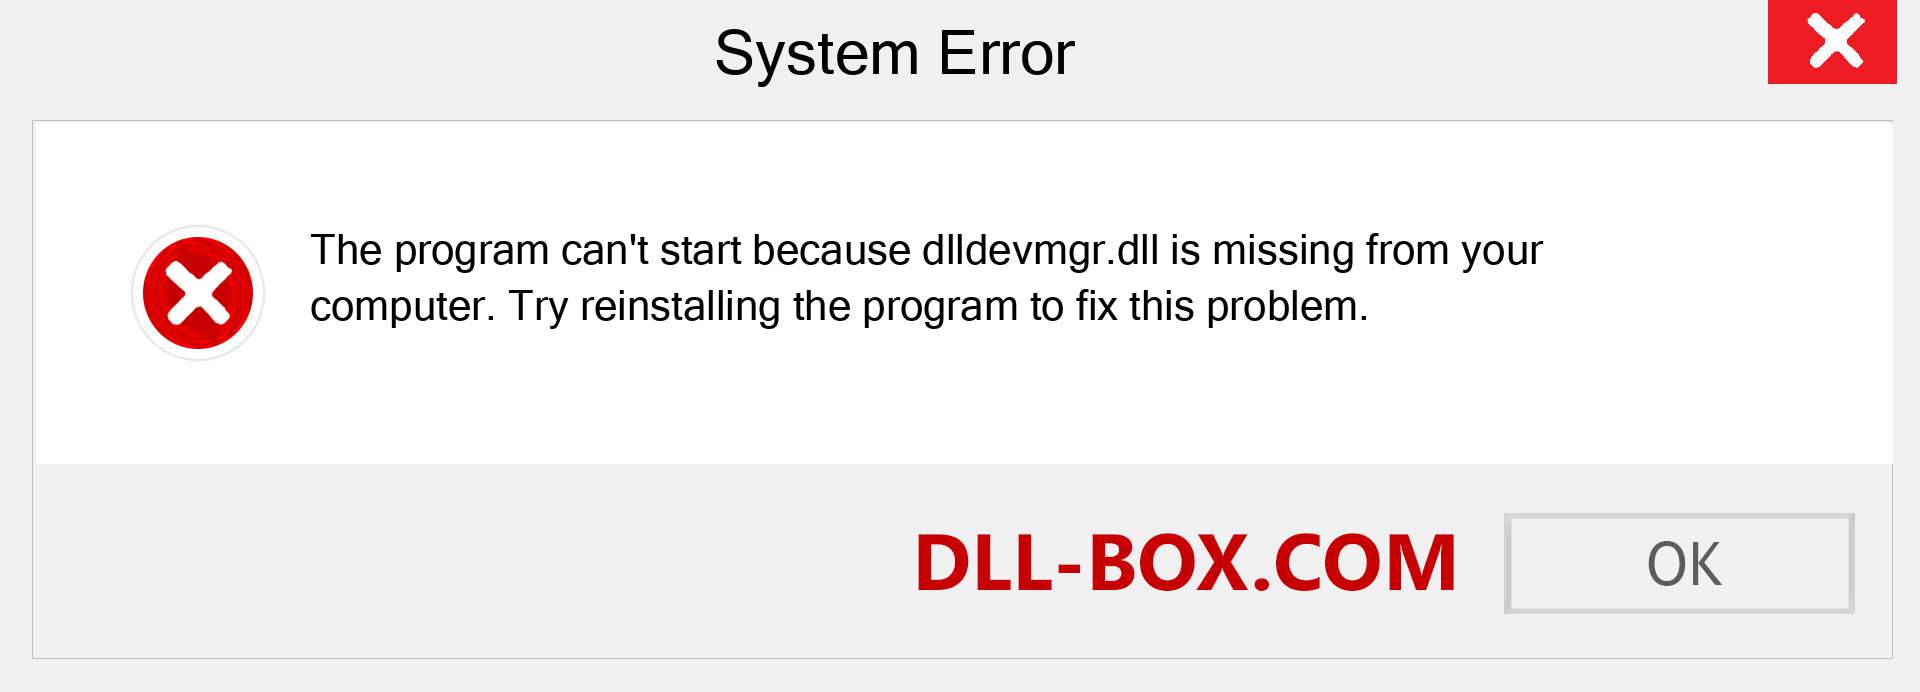  dlldevmgr.dll file is missing?. Download for Windows 7, 8, 10 - Fix  dlldevmgr dll Missing Error on Windows, photos, images